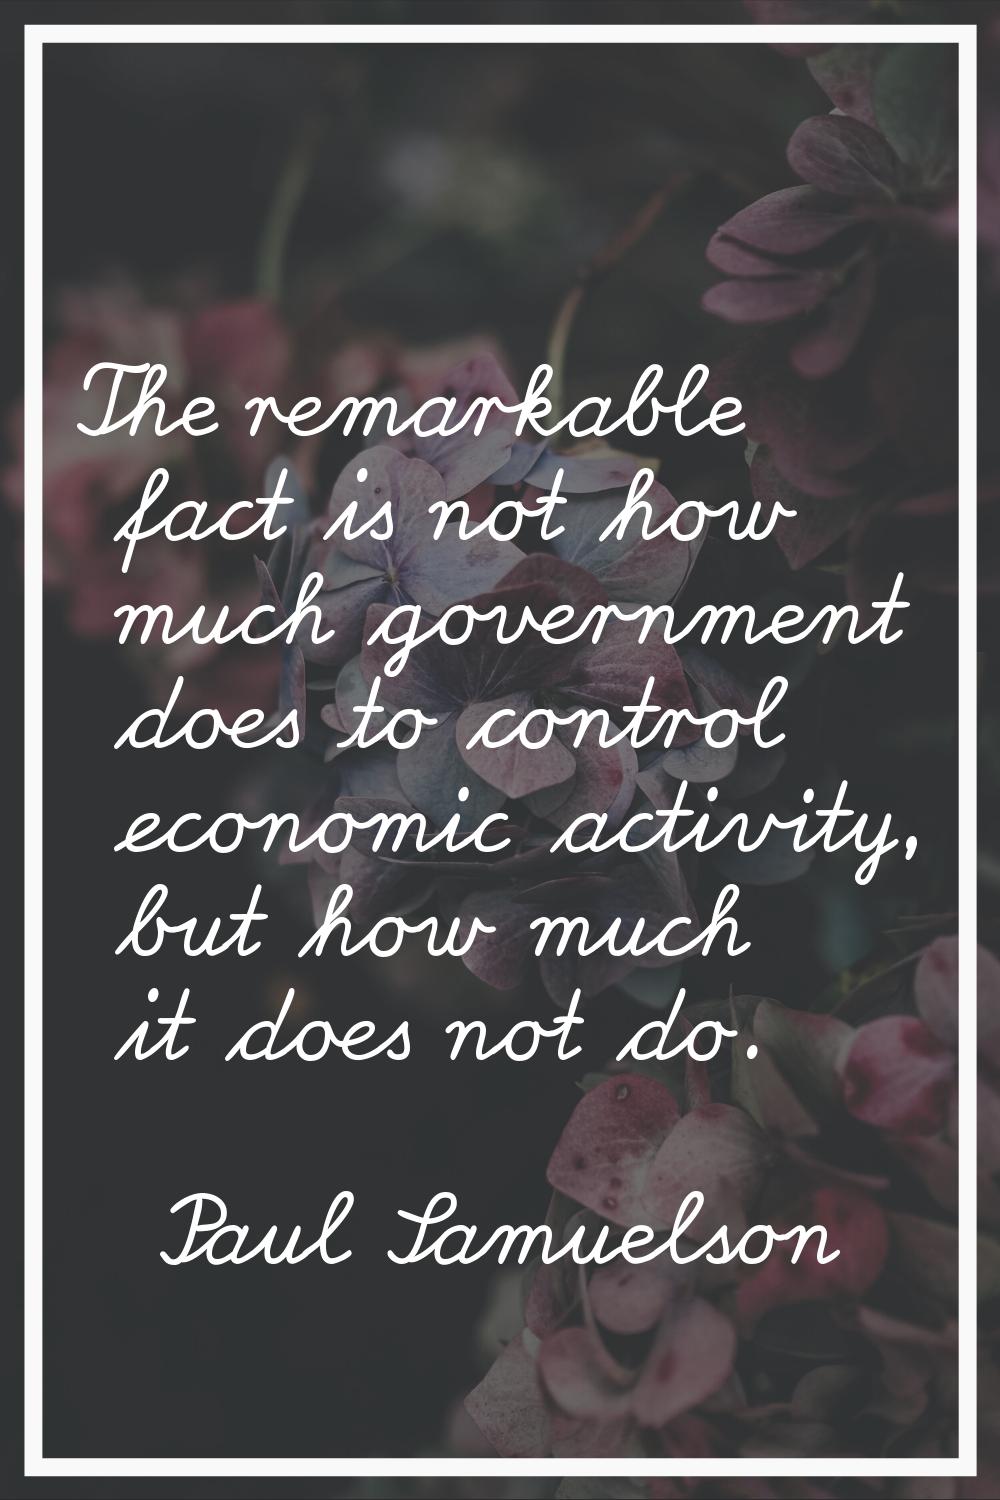 The remarkable fact is not how much government does to control economic activity, but how much it d